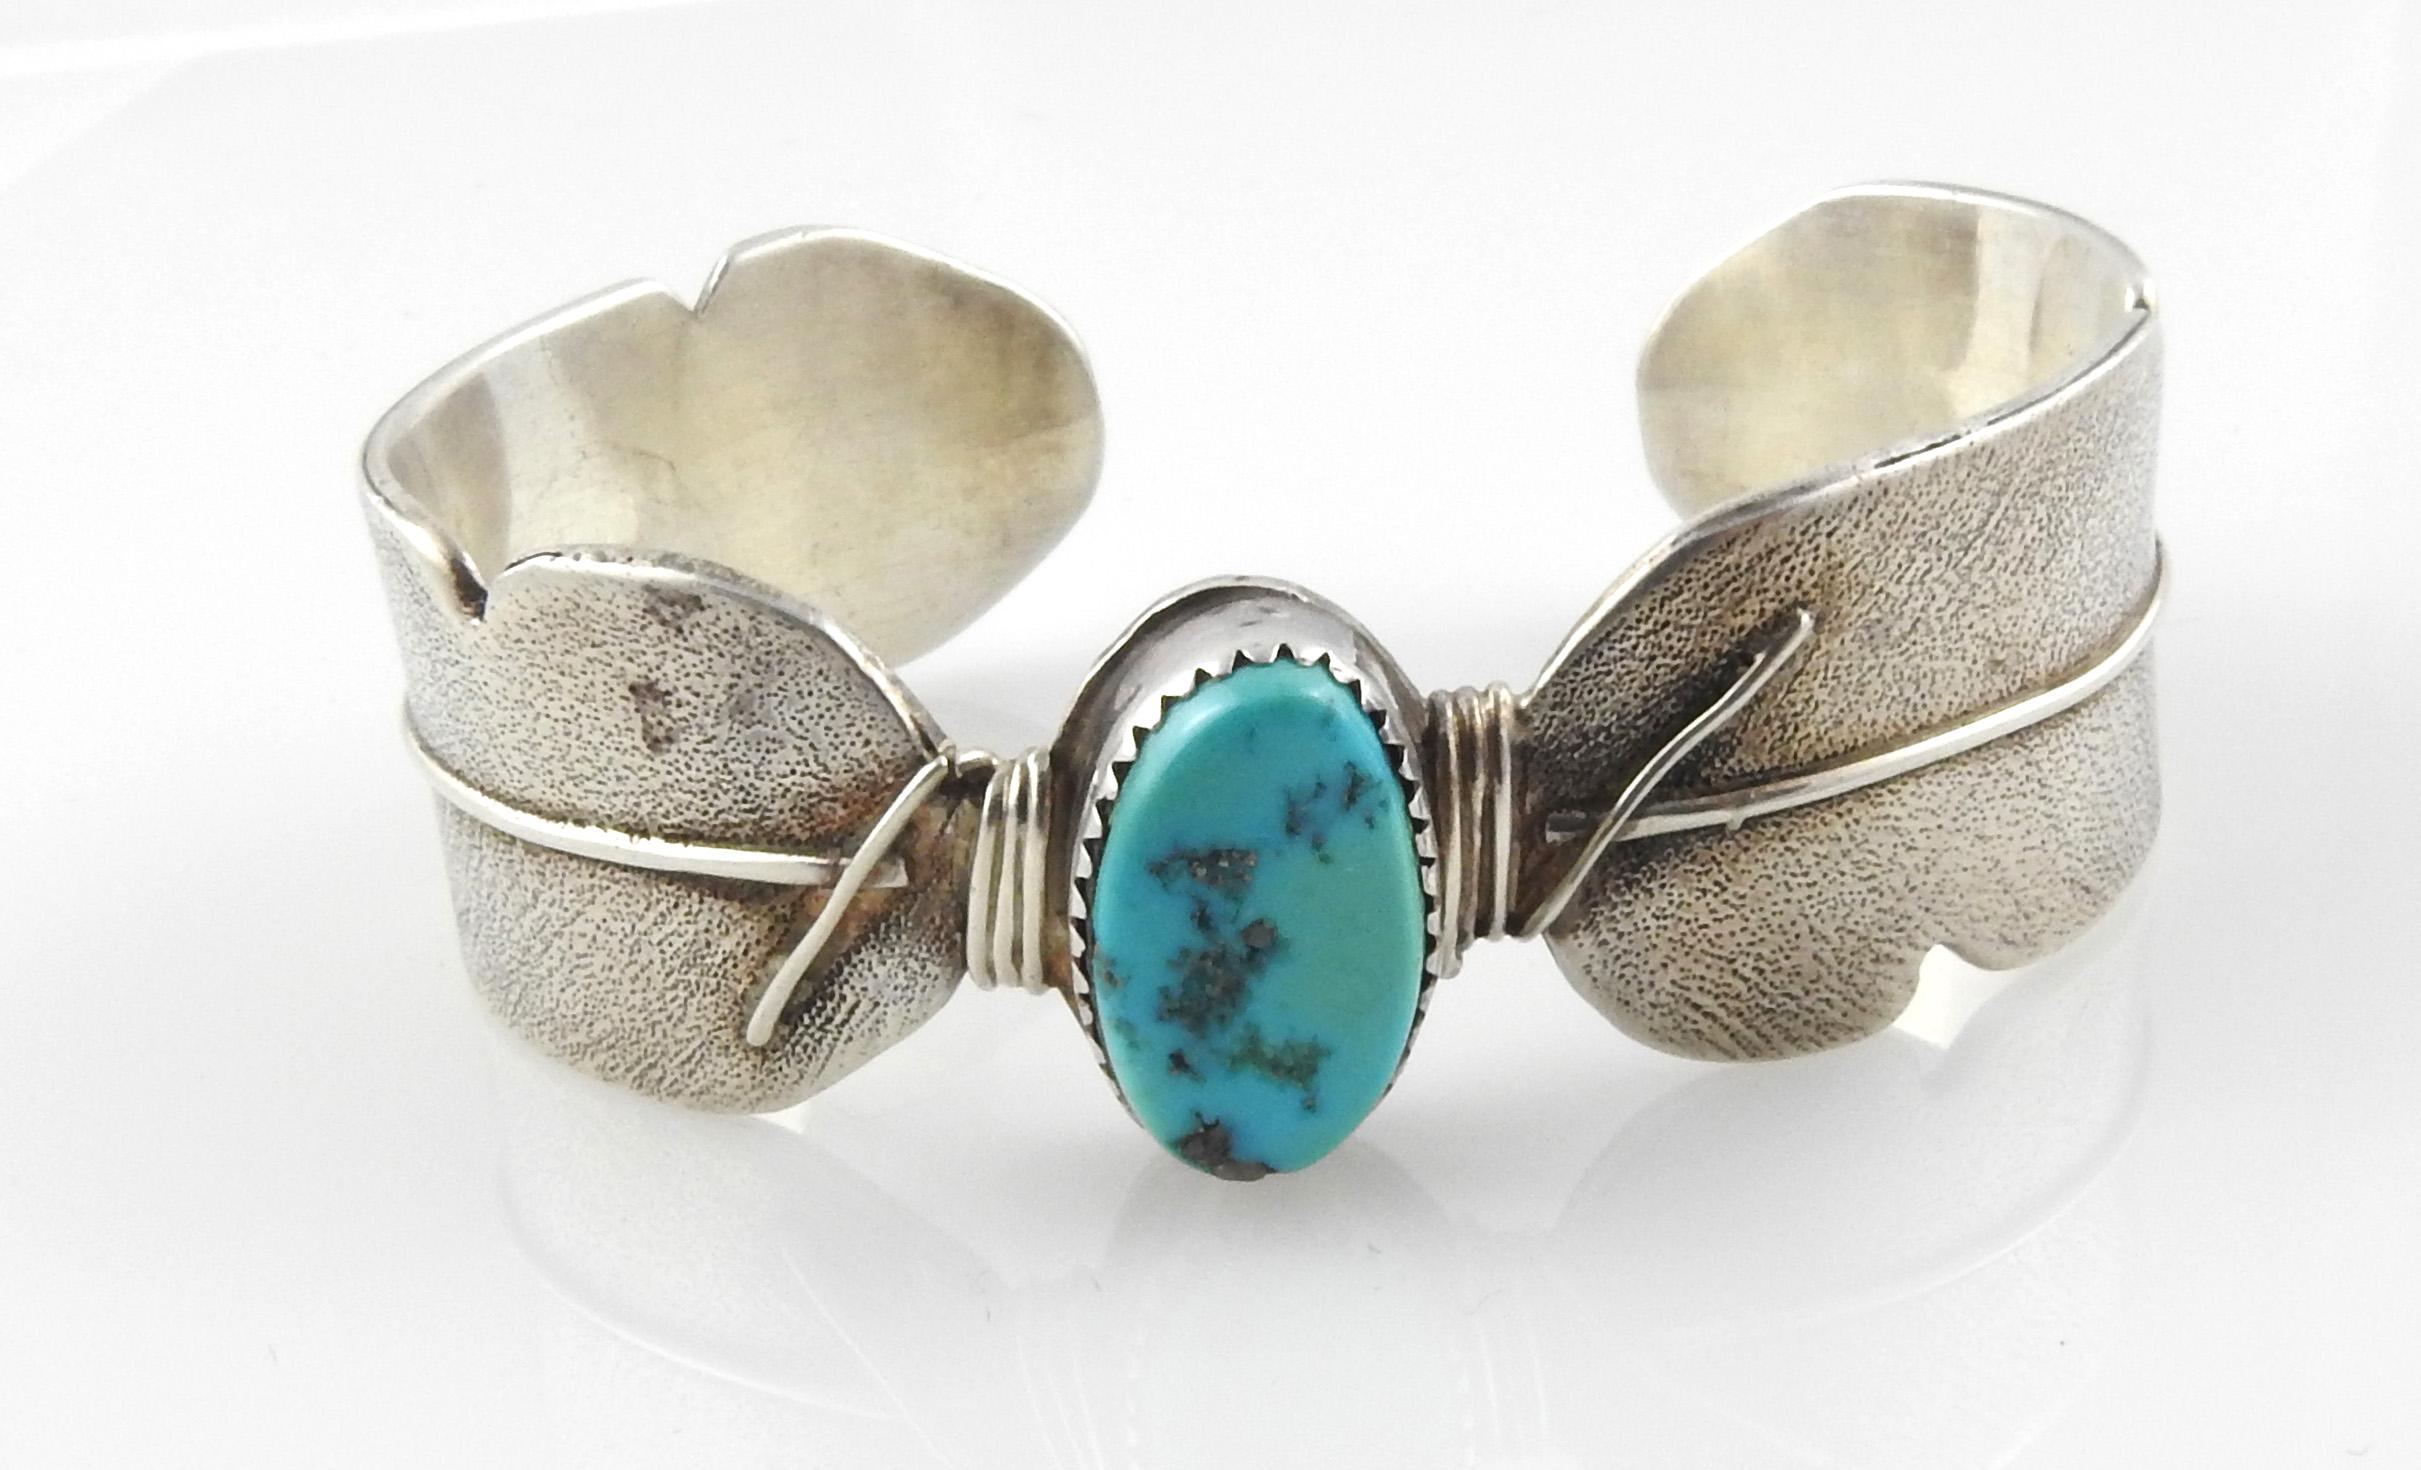 Charlene Dishta, Zuni Native American sterling silver cuff bracelet with turquoise.

Marked: DISHTA, STERLING

Measures: 5 1/2